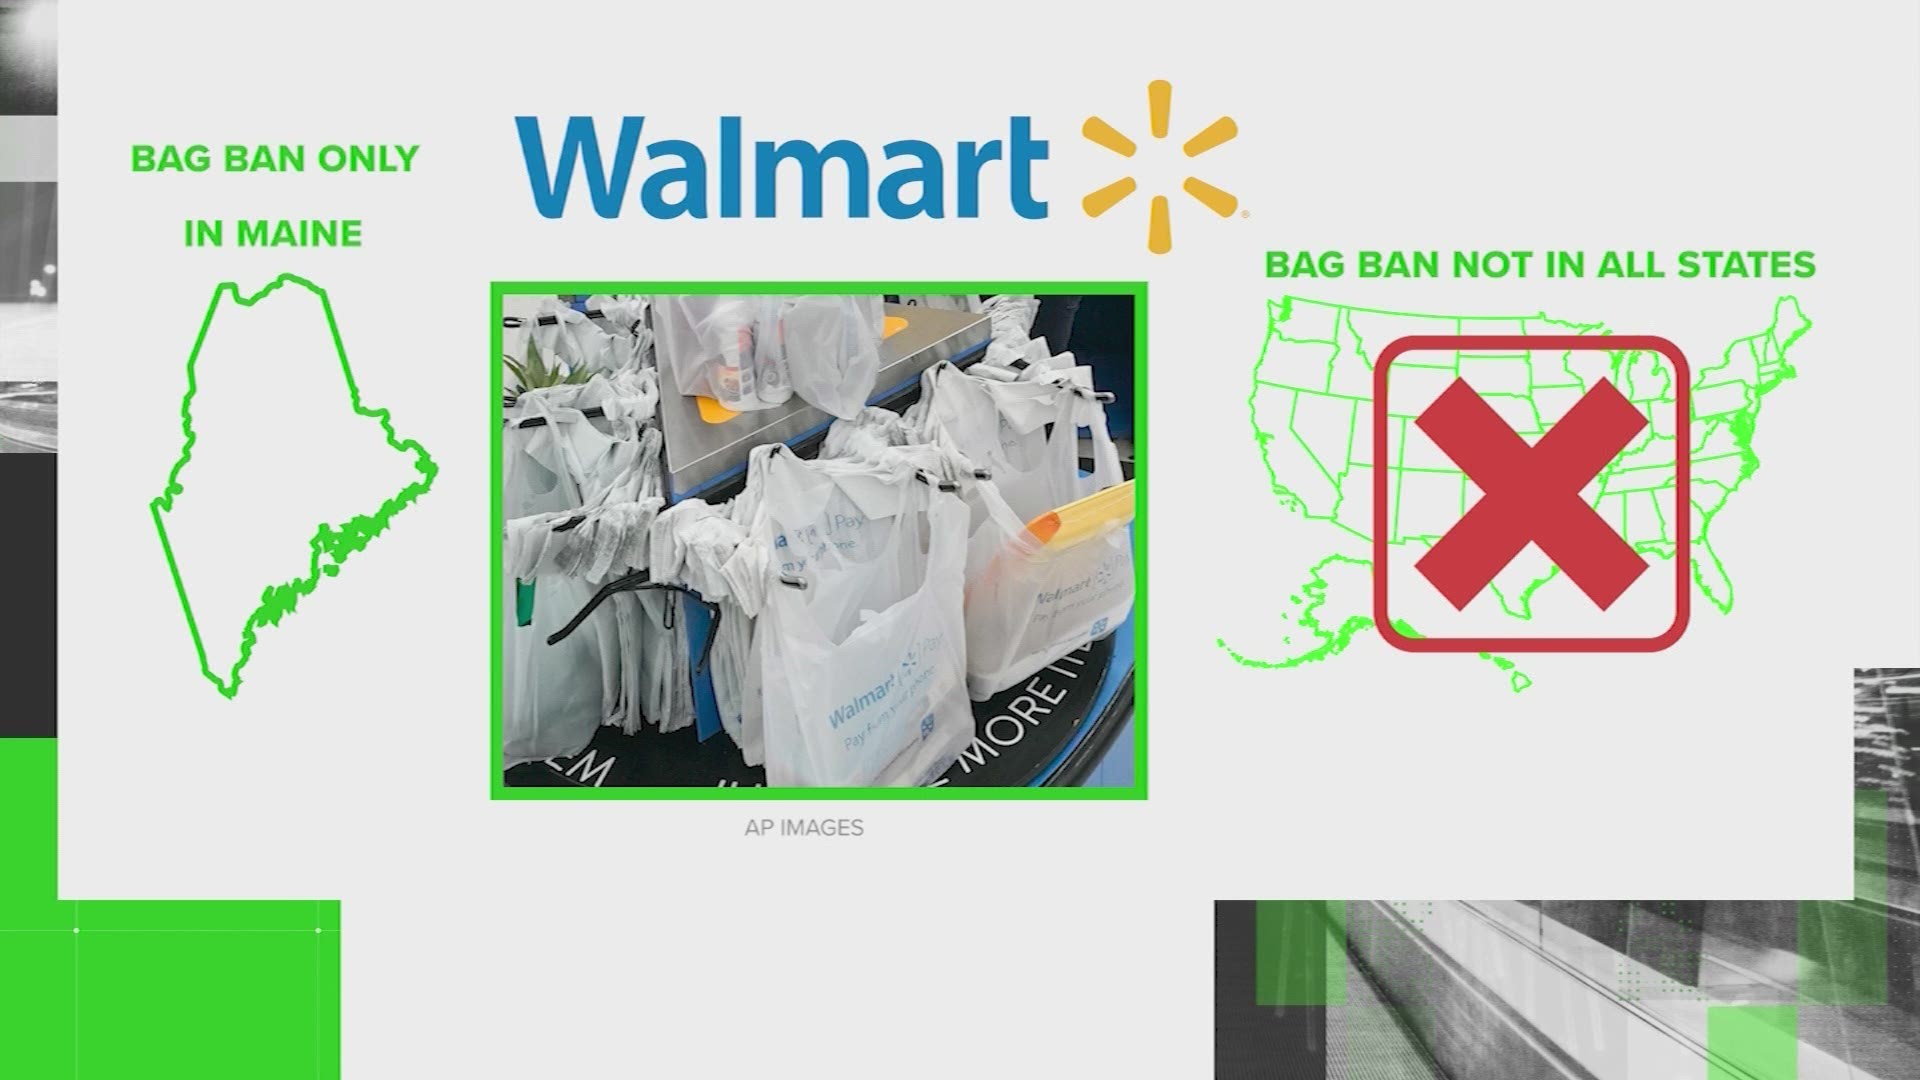 Walmart says the claim is not true in Texas, but it is true in another state.